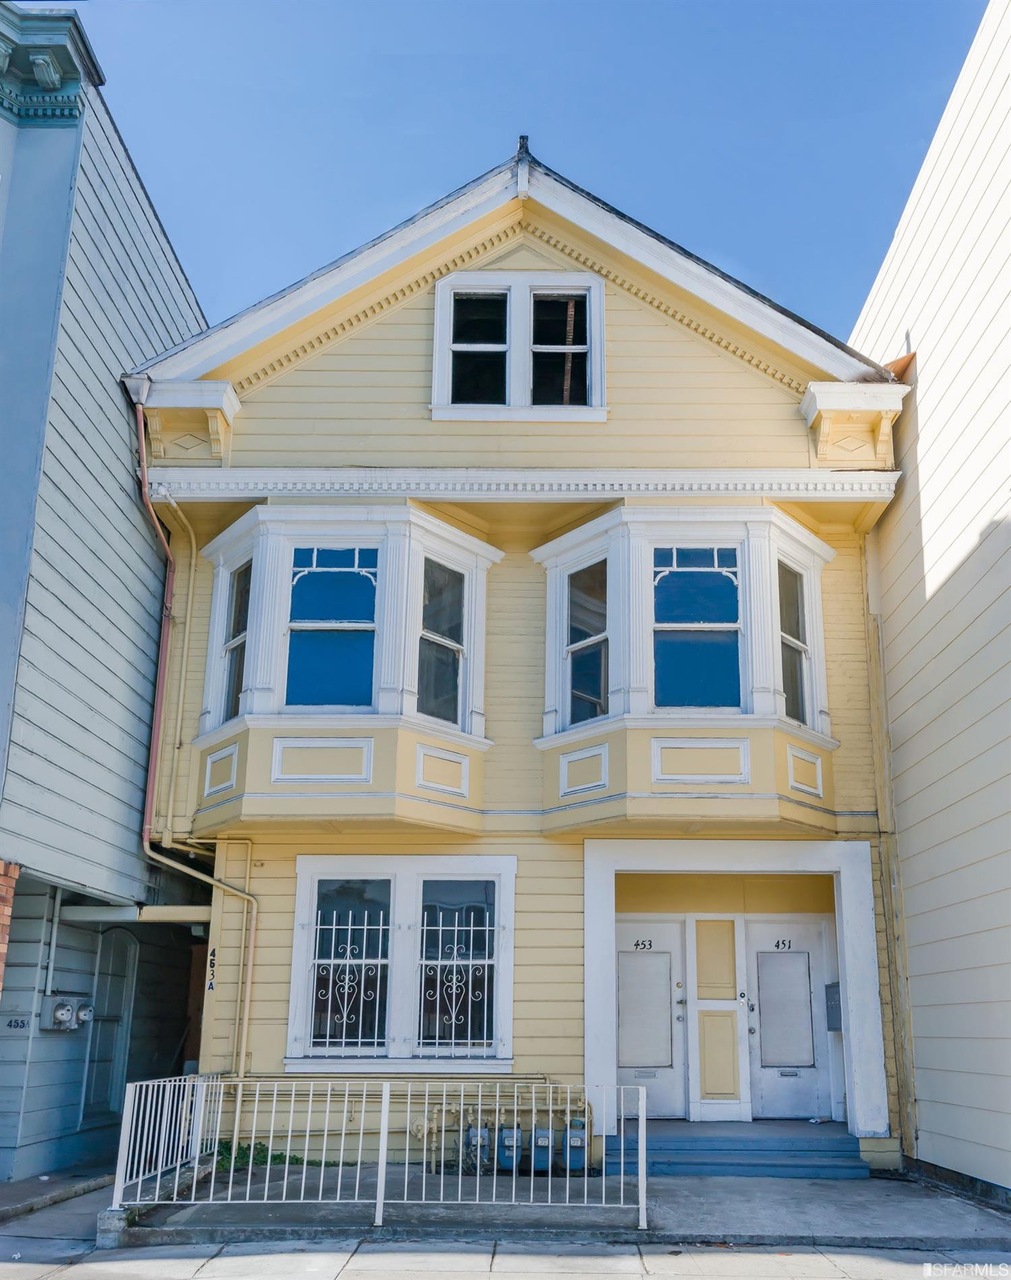 The undamaged looking facade of a yellow Richmond district Victorian home.